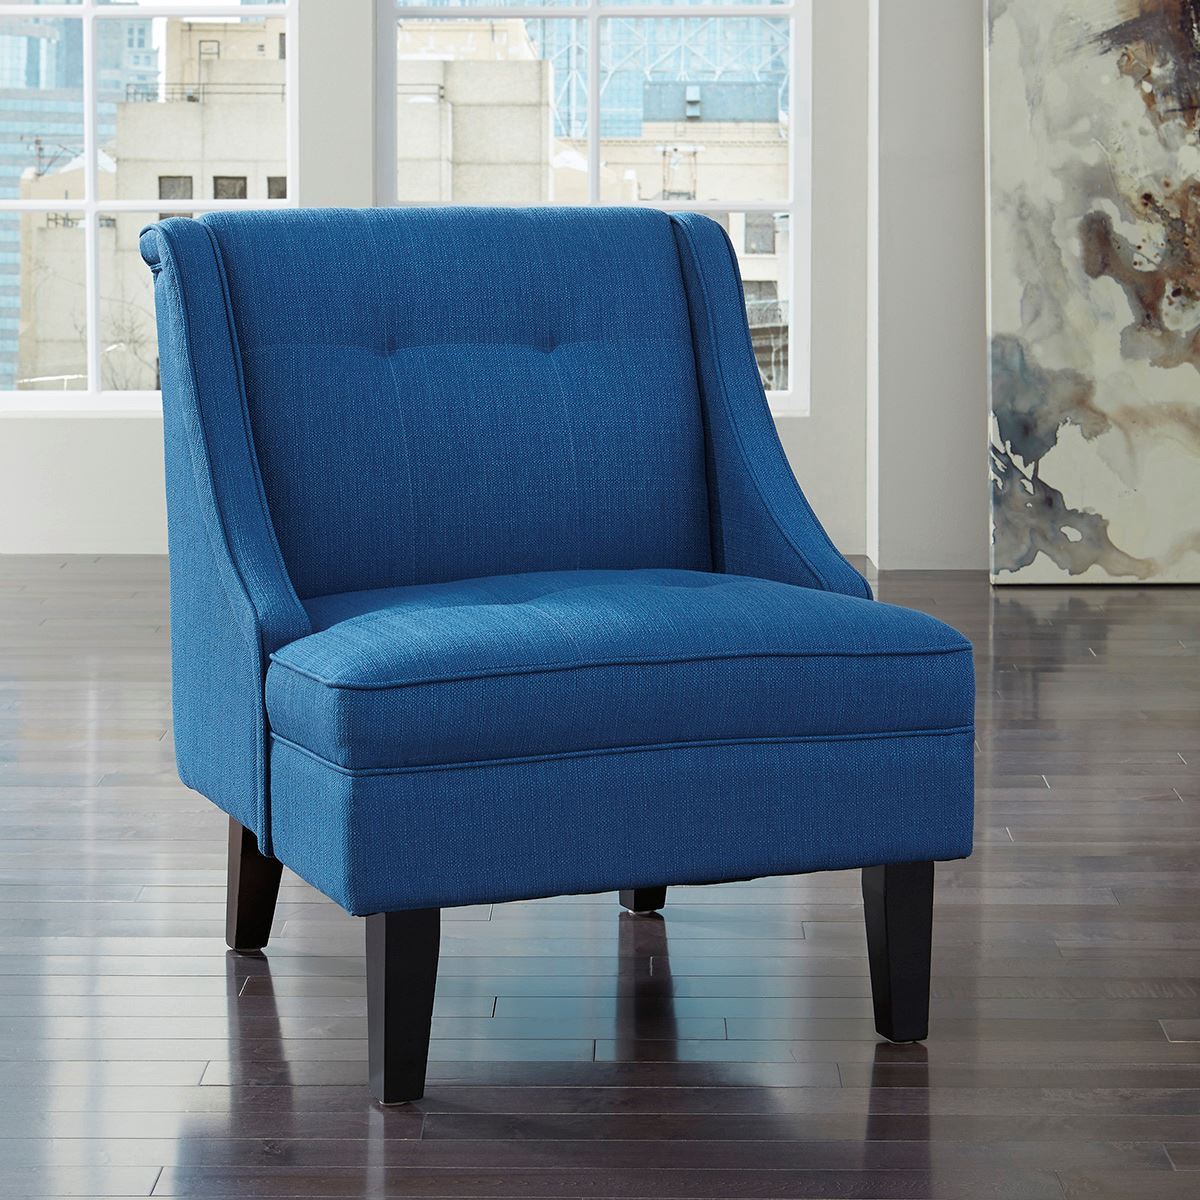 Accent Chair in Blue Living Room Chairs Lifestyle